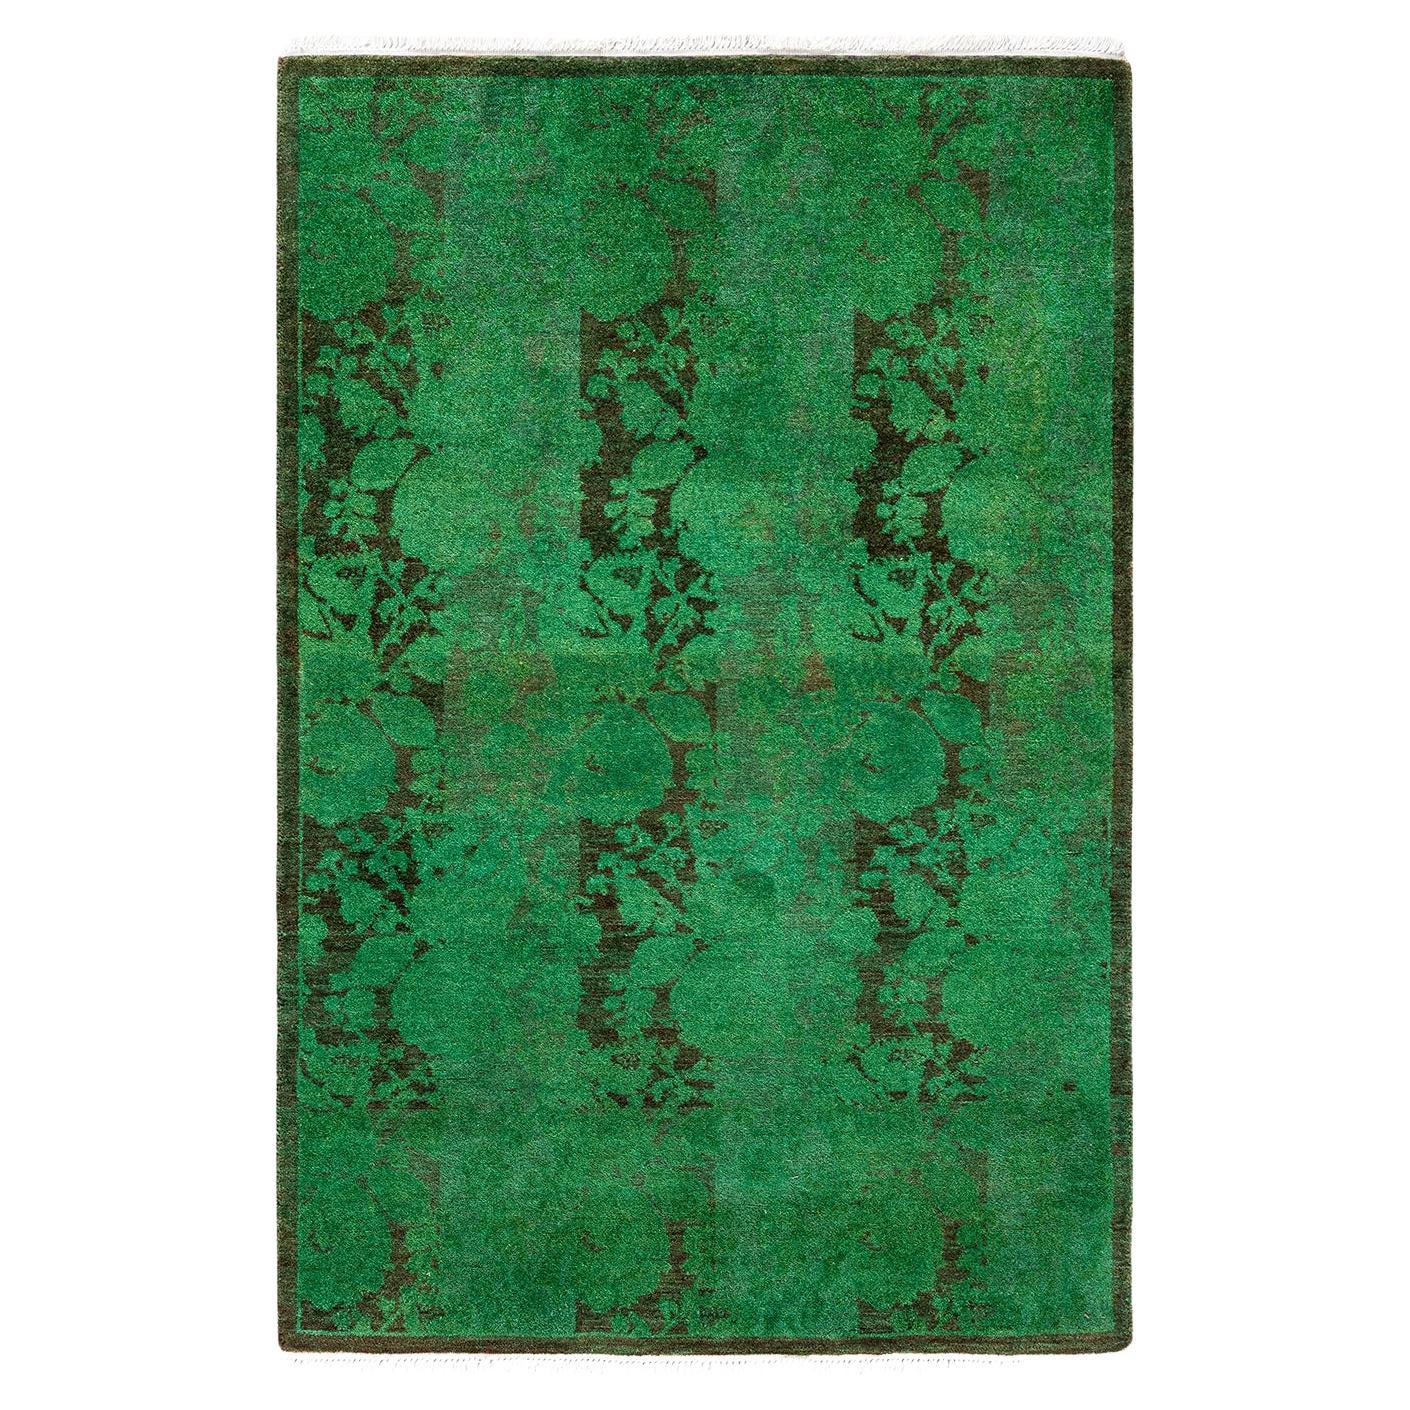 Contemporary Fine Vibrance Hand Knotted Wool Green Area Rug